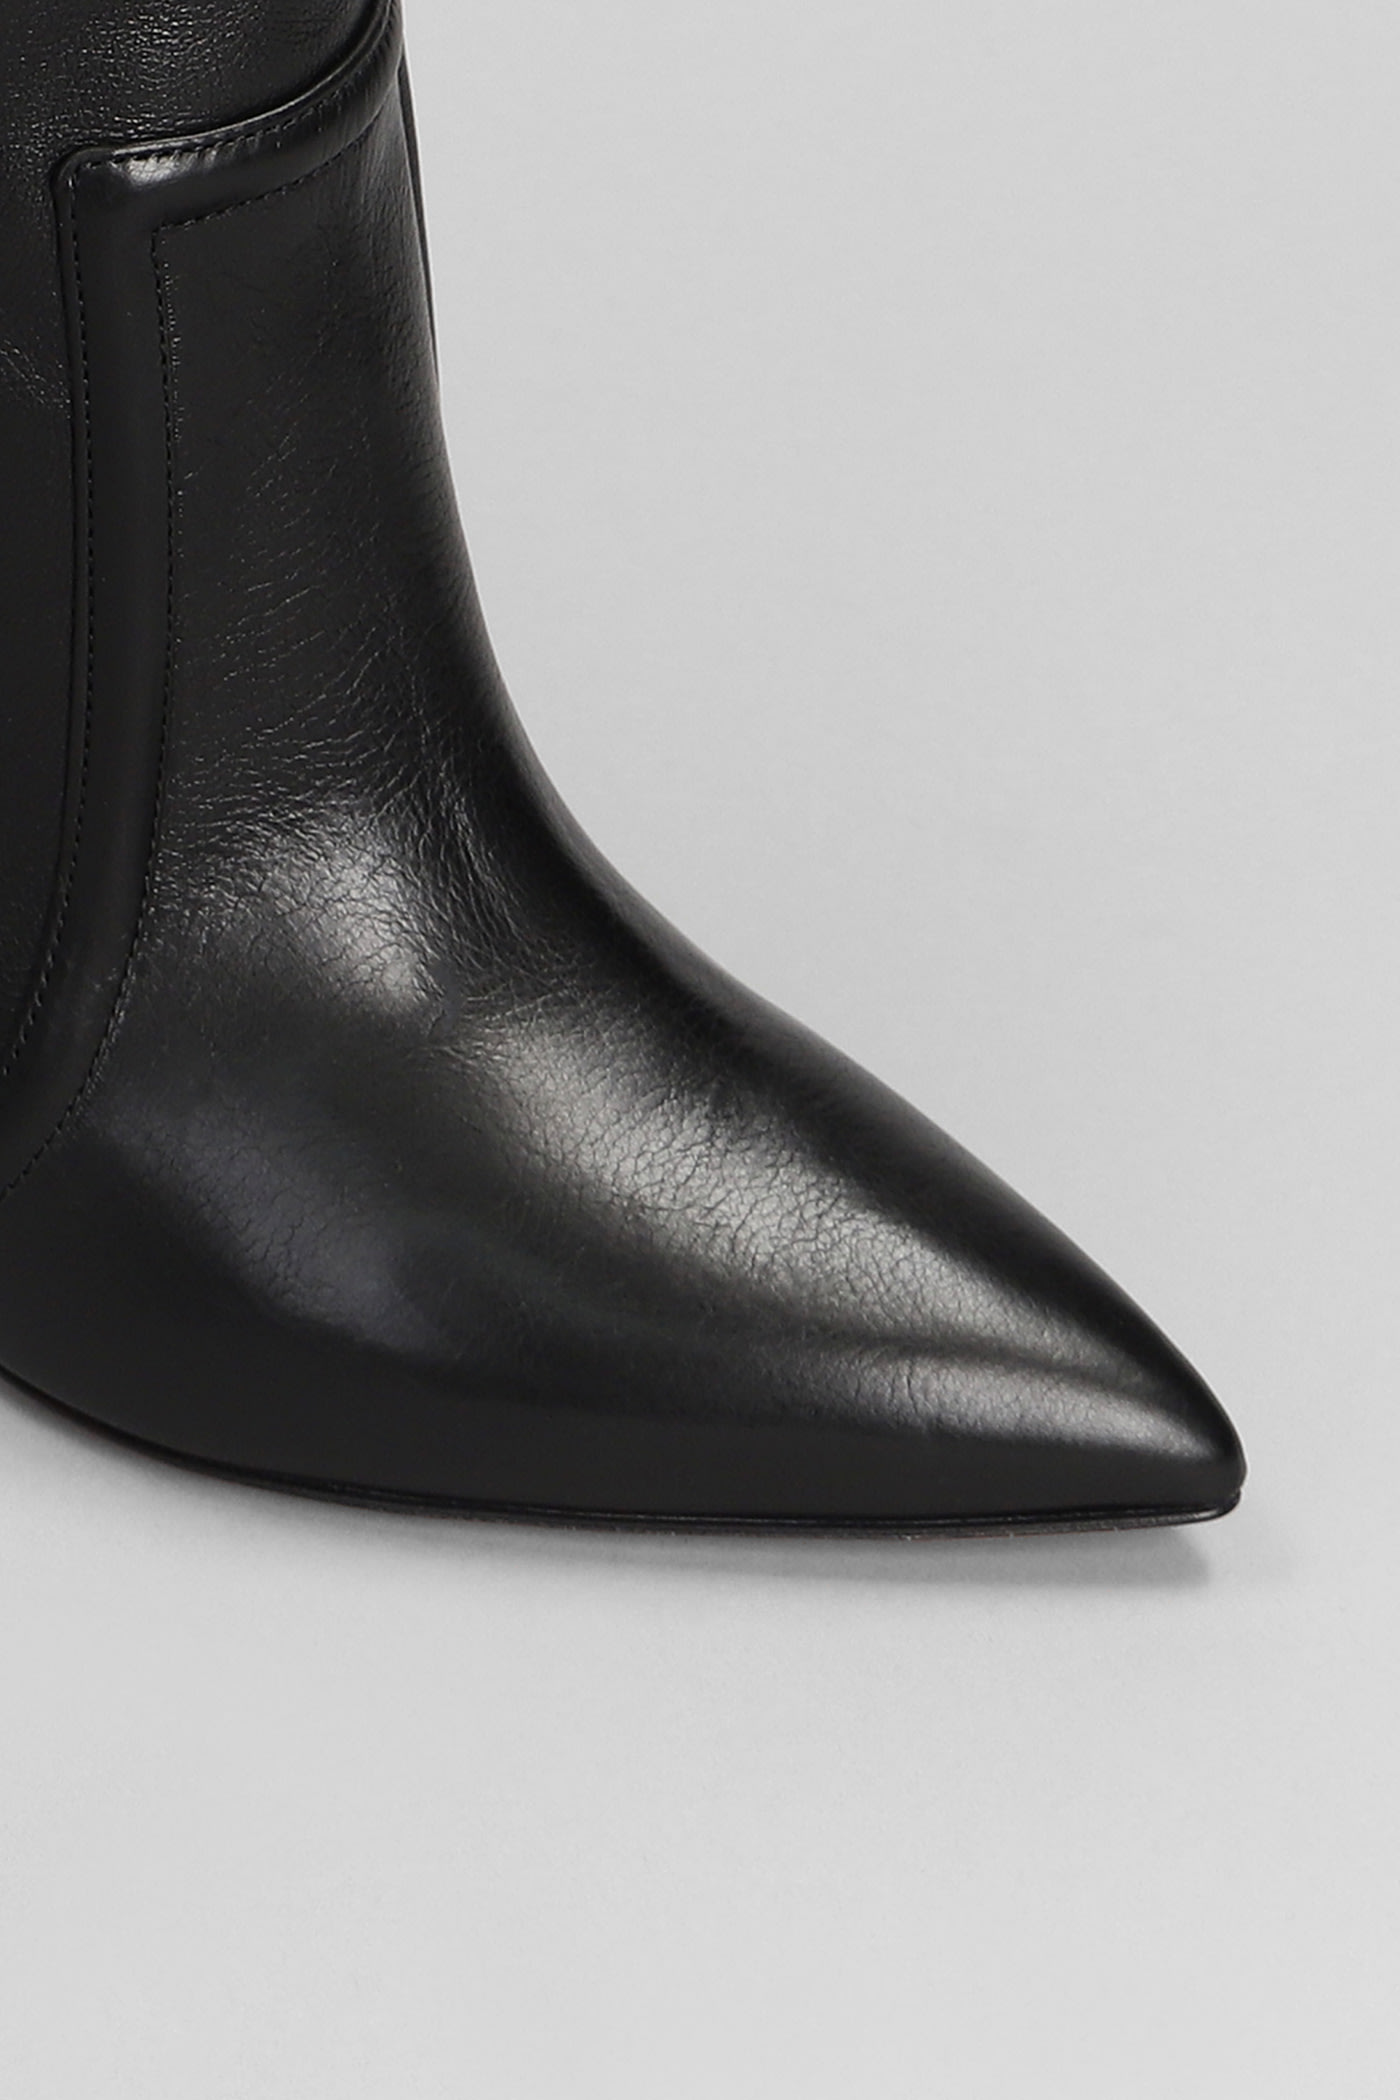 Shop Paris Texas High Heels Ankle Boots In Black Leather